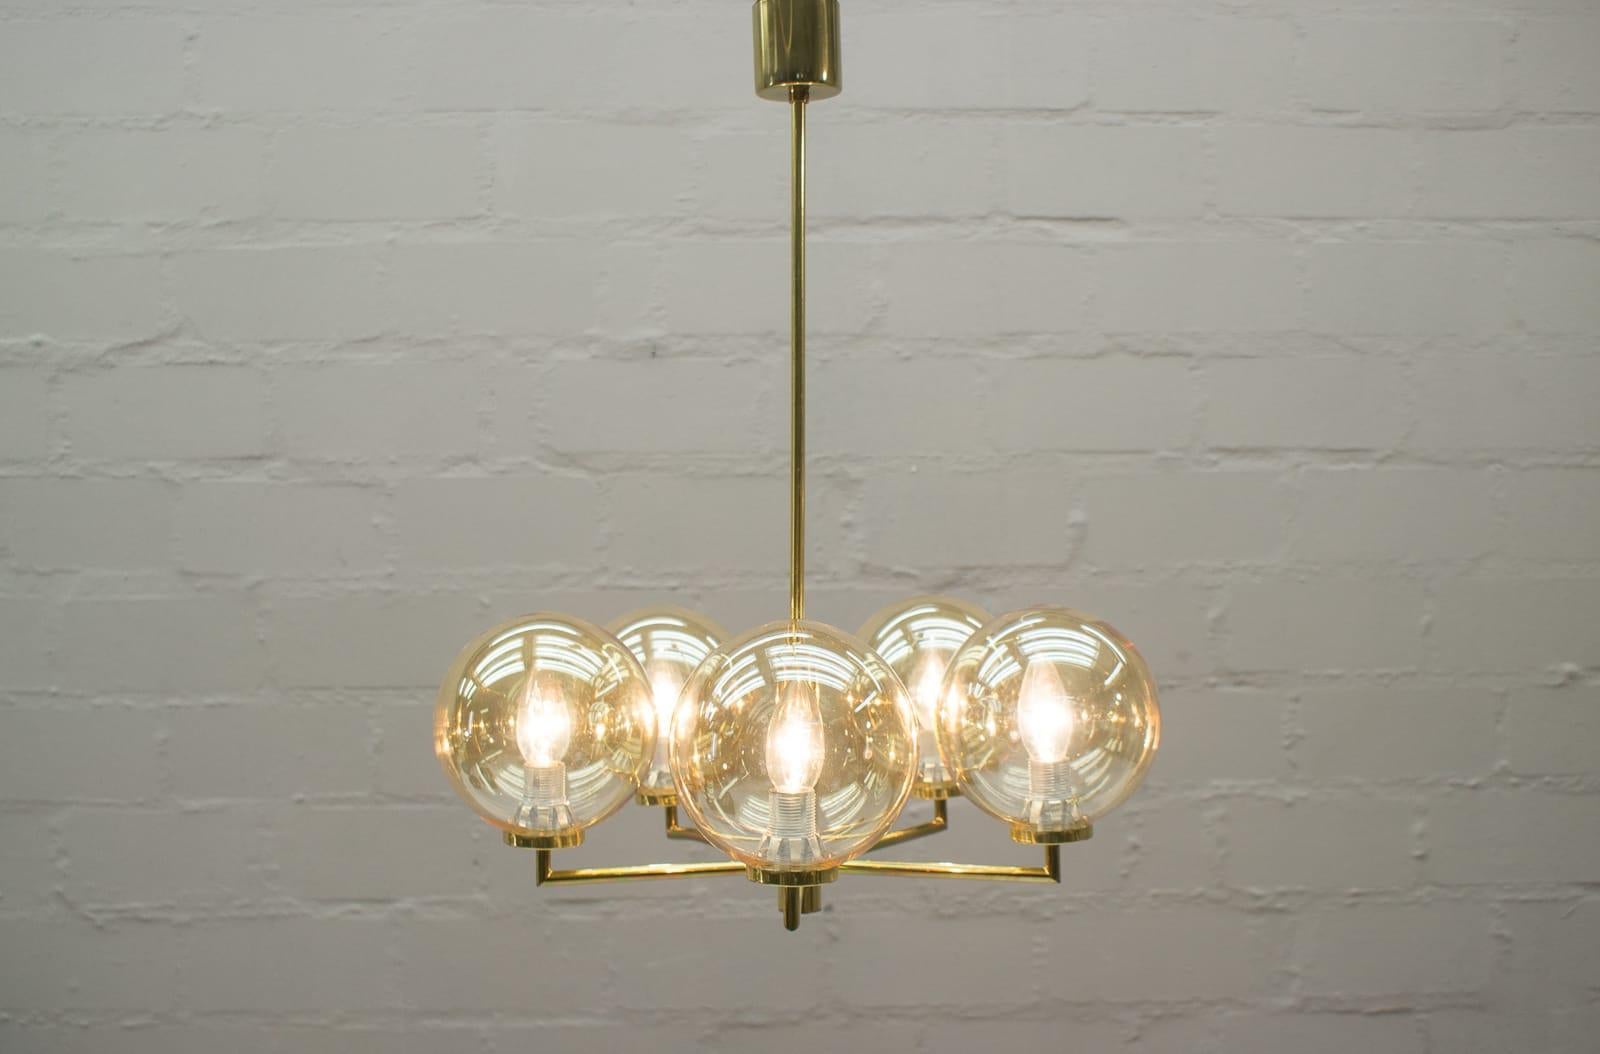 Mid-Century Modern Space Age Orbit Ceiling Lamp with Five Amber Glass Balls, 1960s For Sale